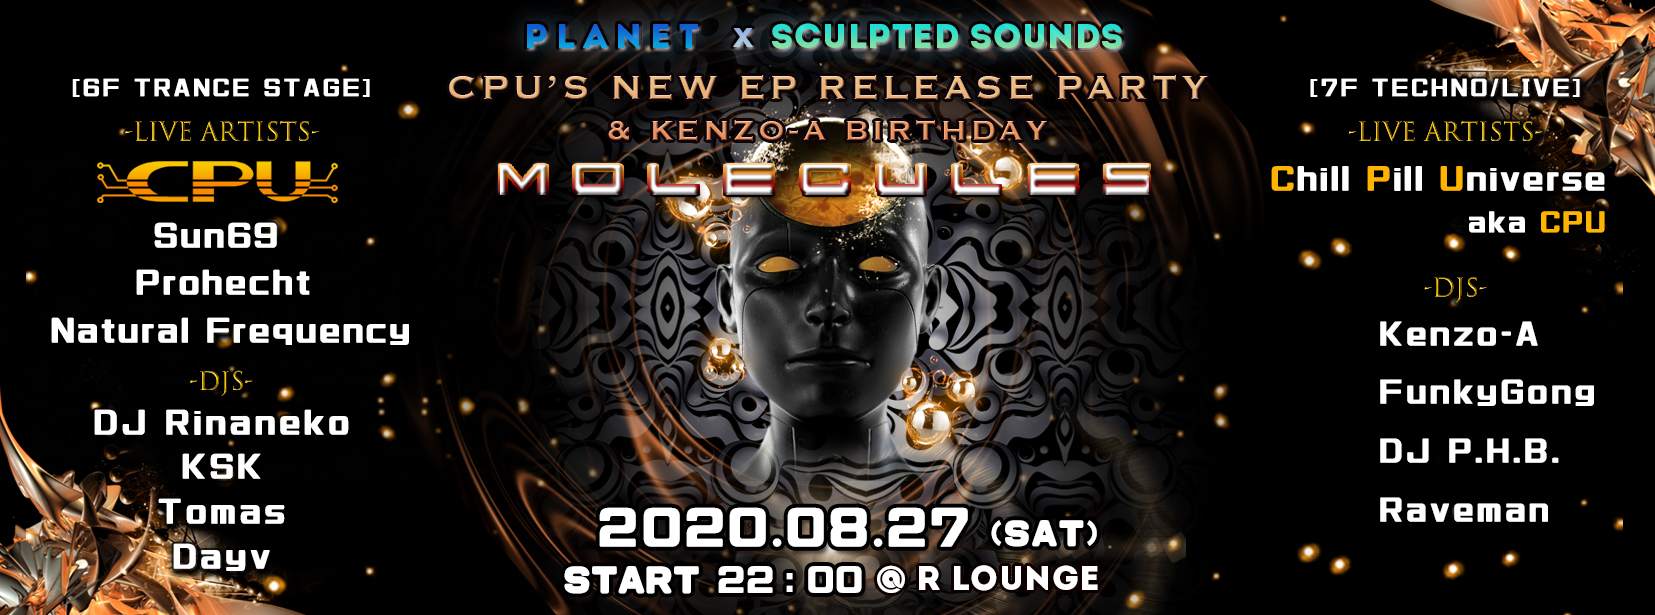 CPU New EP Release Party 'Molecules' organized by Planet x Sculpted Sounds - Página frontal